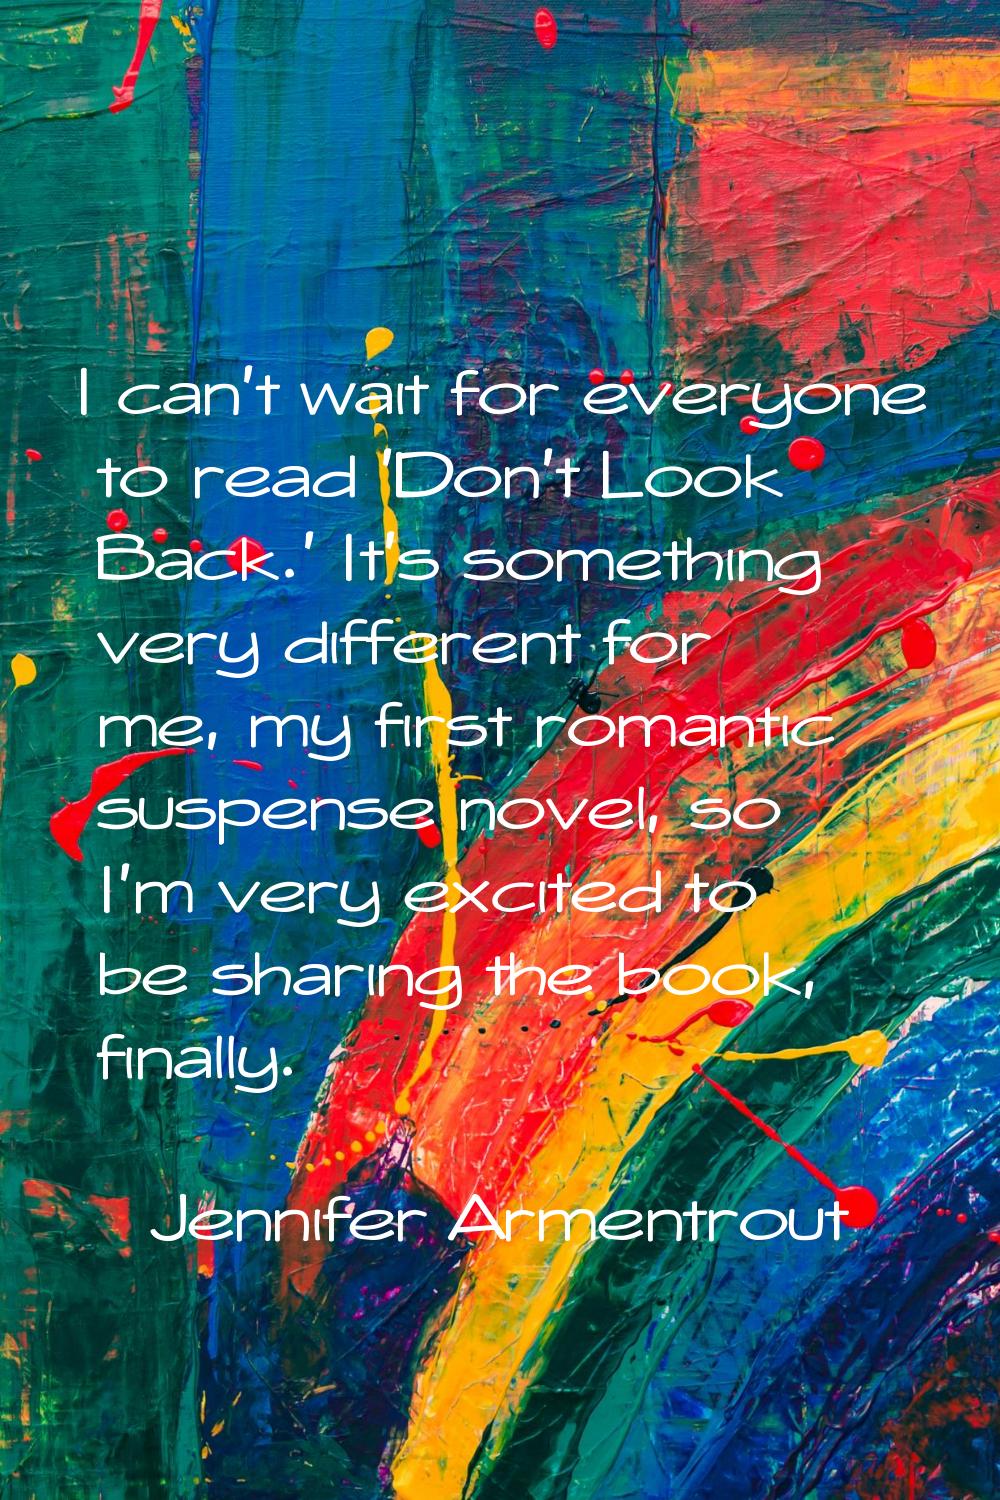 I can't wait for everyone to read 'Don't Look Back.' It's something very different for me, my first